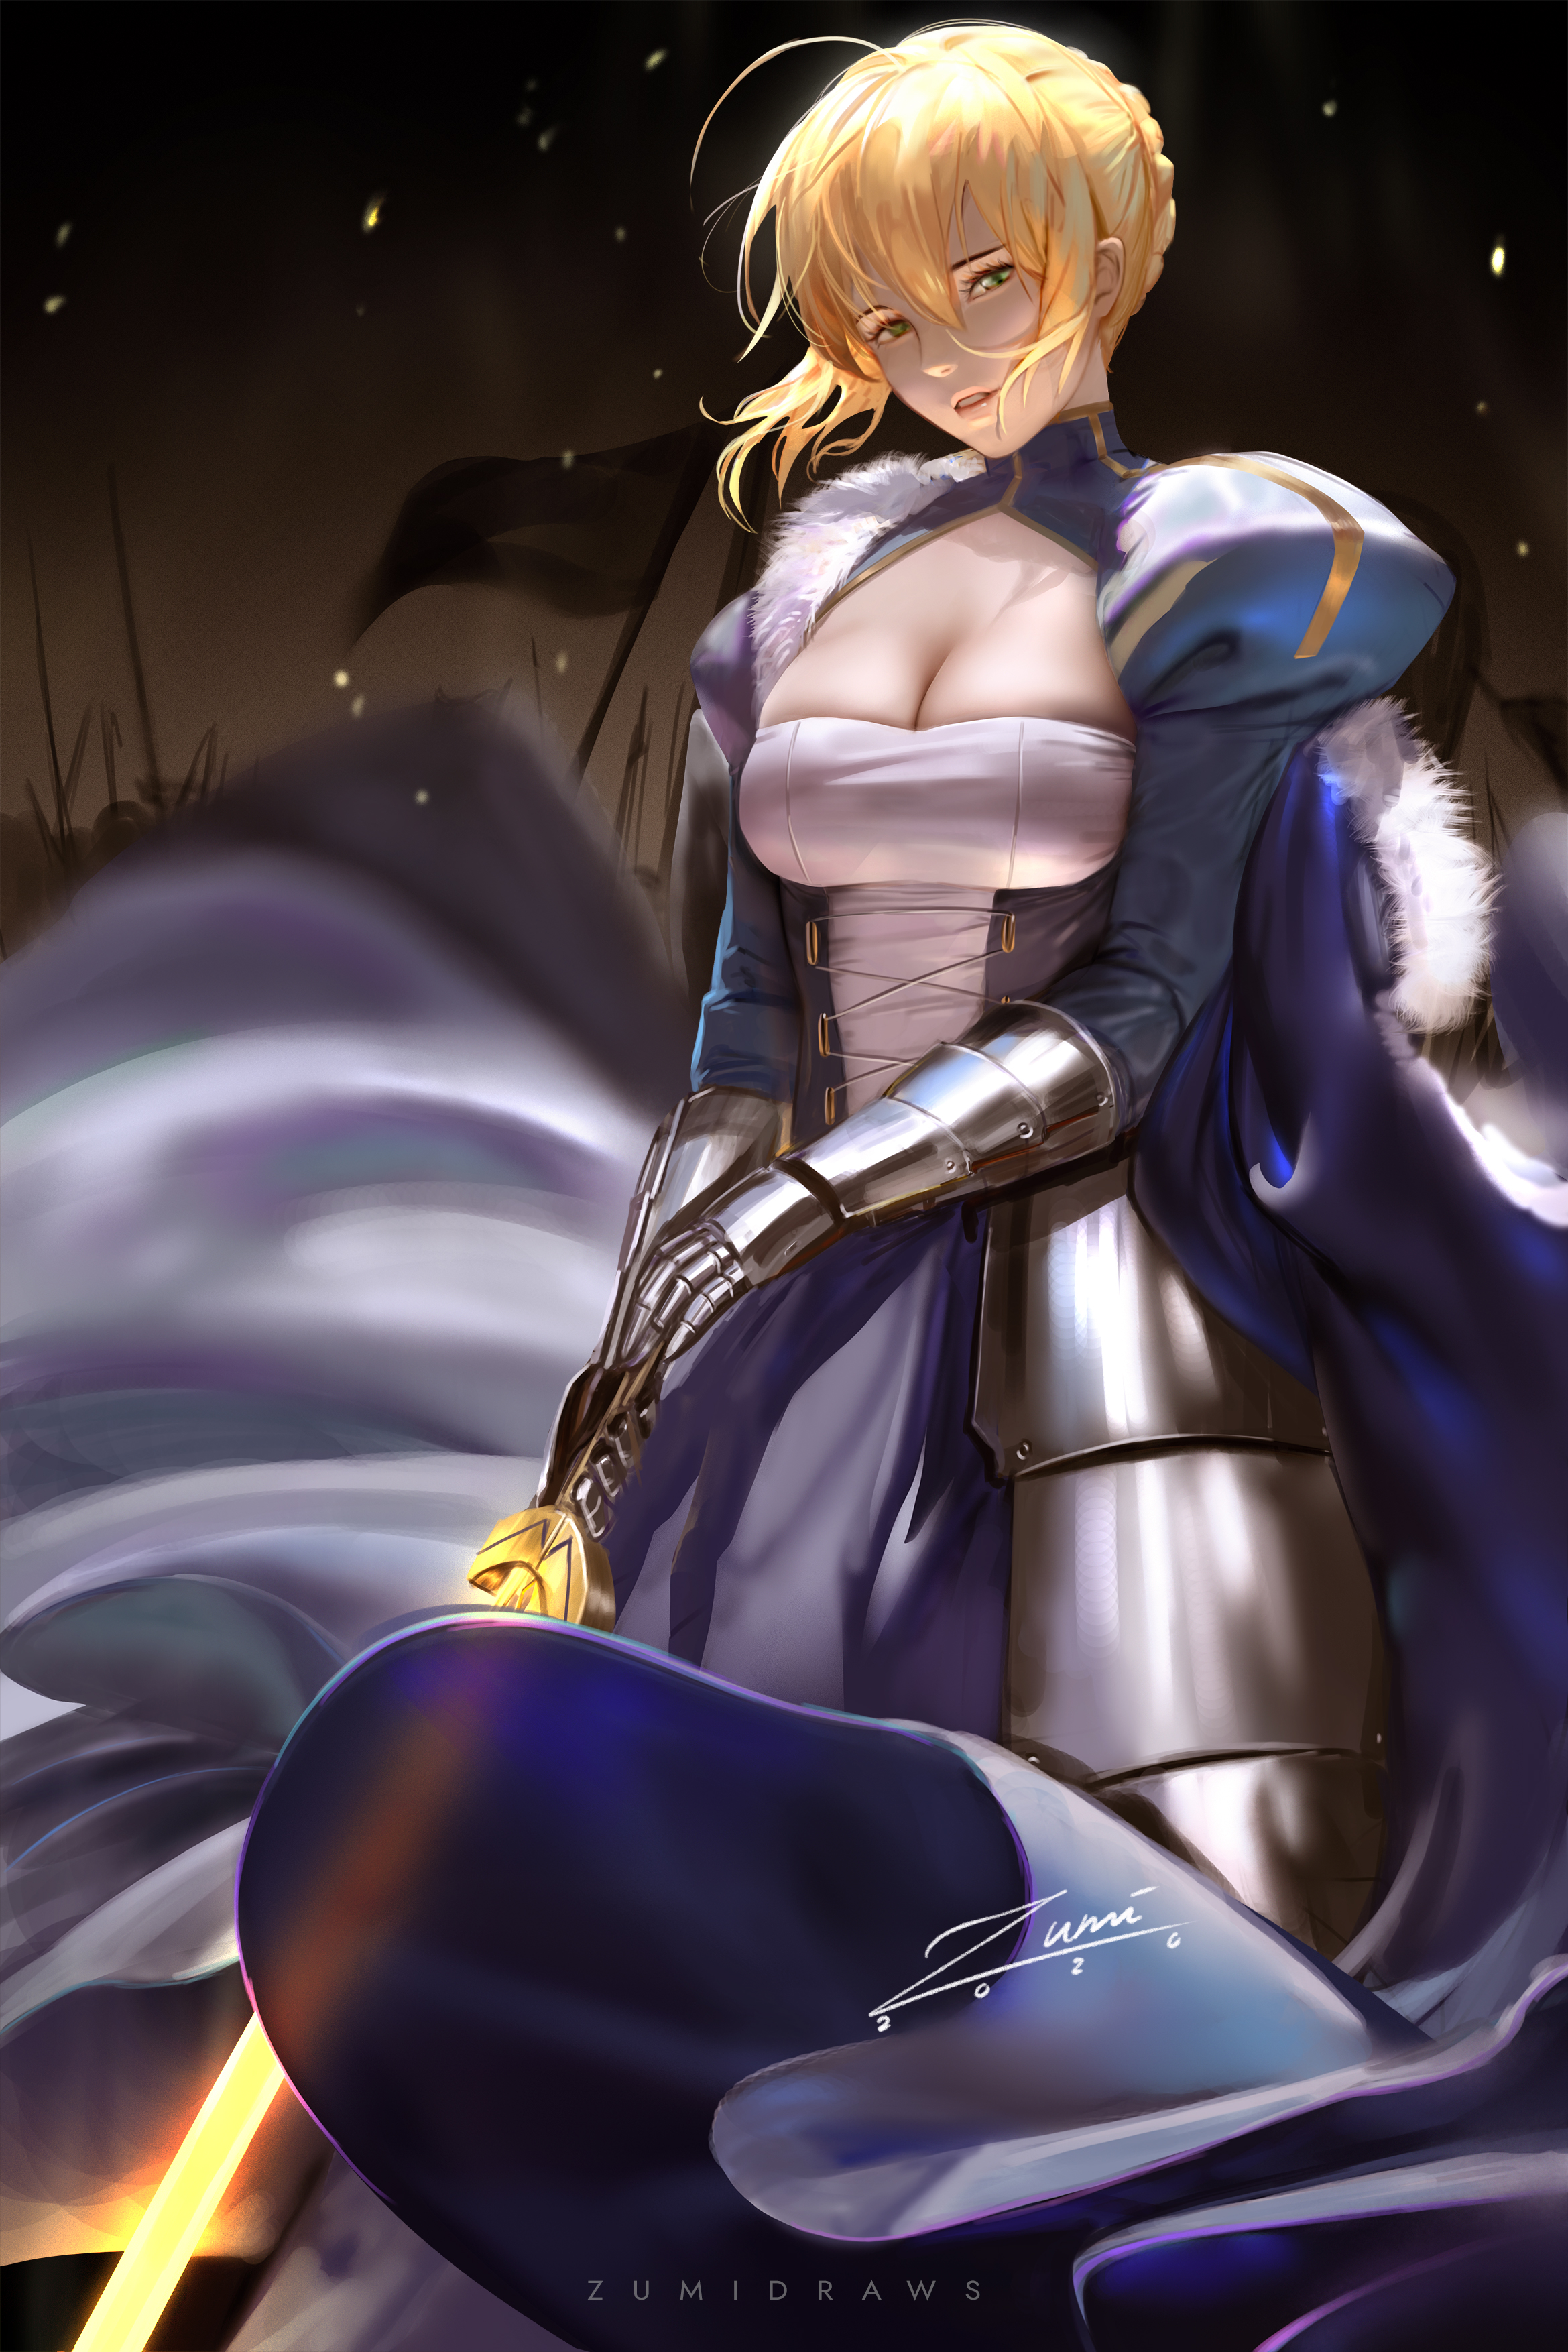 Anime 2339x3508 Saber Fate series anime girls fan art looking at viewer armor cape sword women with swords fantasy art glowing cleavage portrait display artwork digital art illustration watermarked Zumi smiling green eyes Fate/Stay Night Fate/Zero female warrior 2D Excalibur blue dress blonde Artoria Pendragon